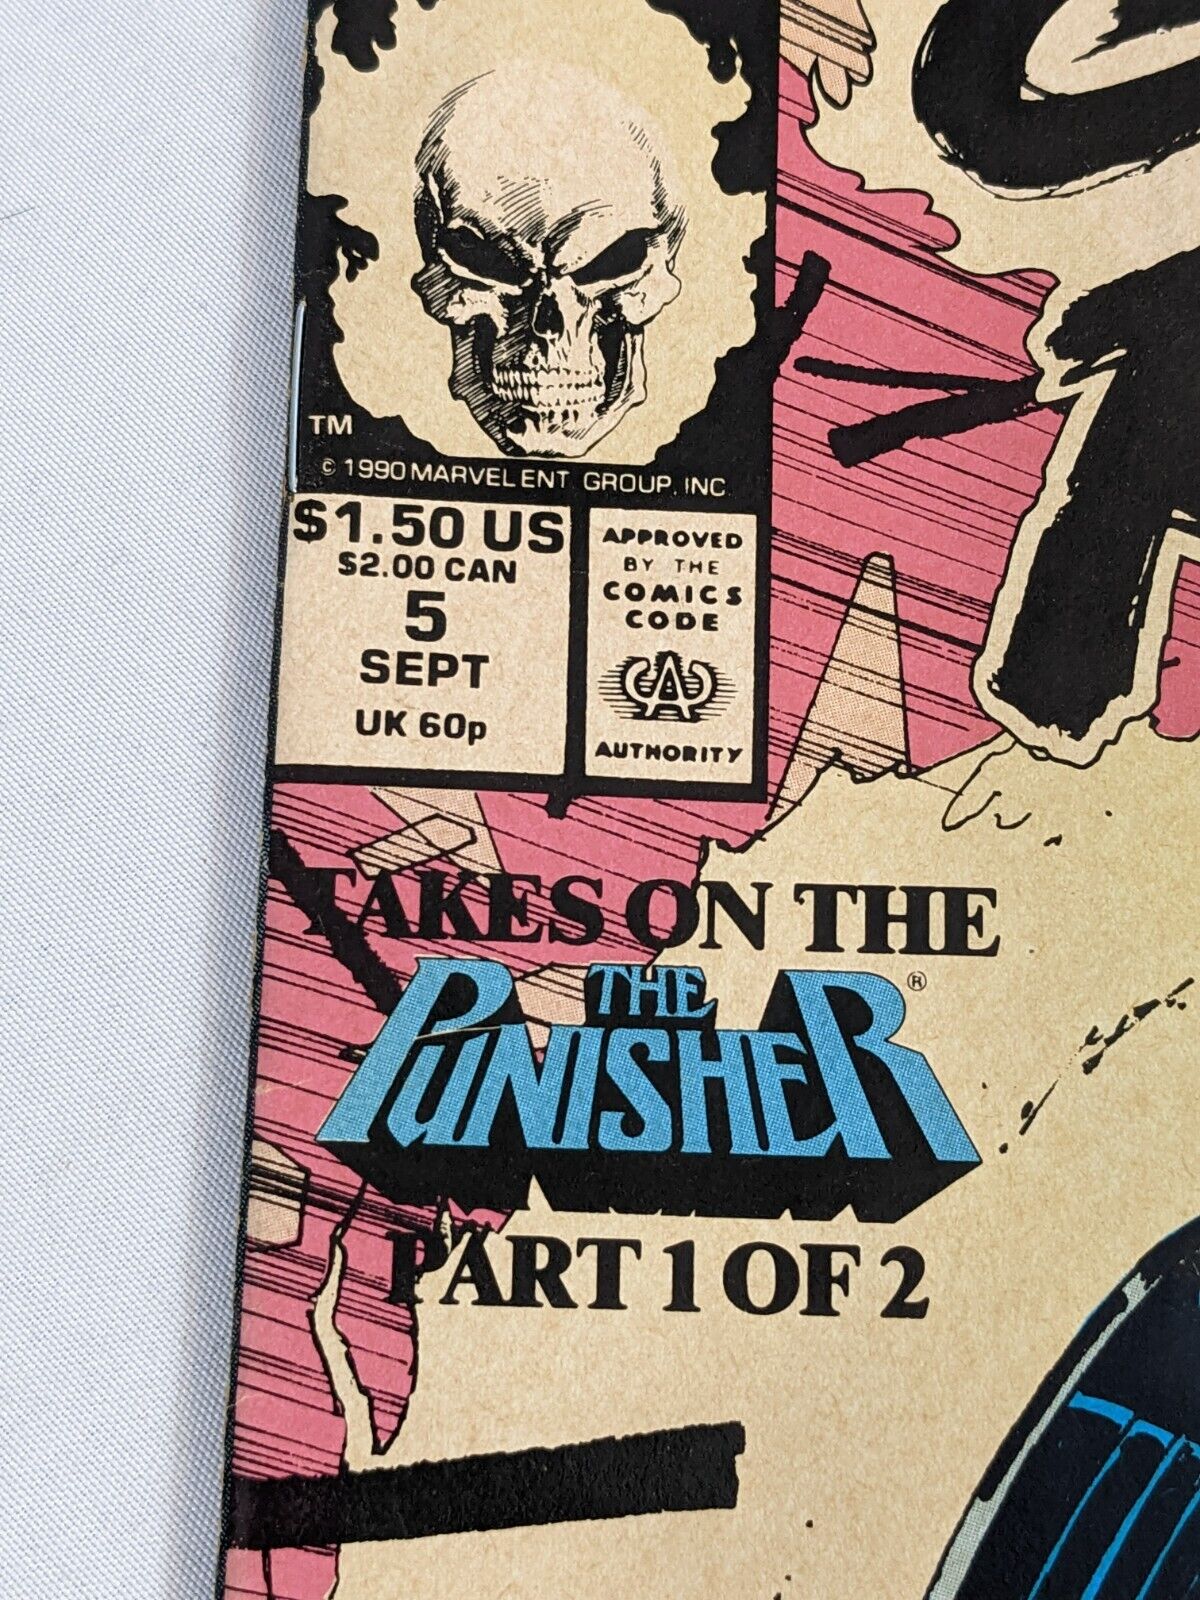 Marvel Comics Ghost Rider: Takes on the Punisher Part 1 of 2 #5 September 1990